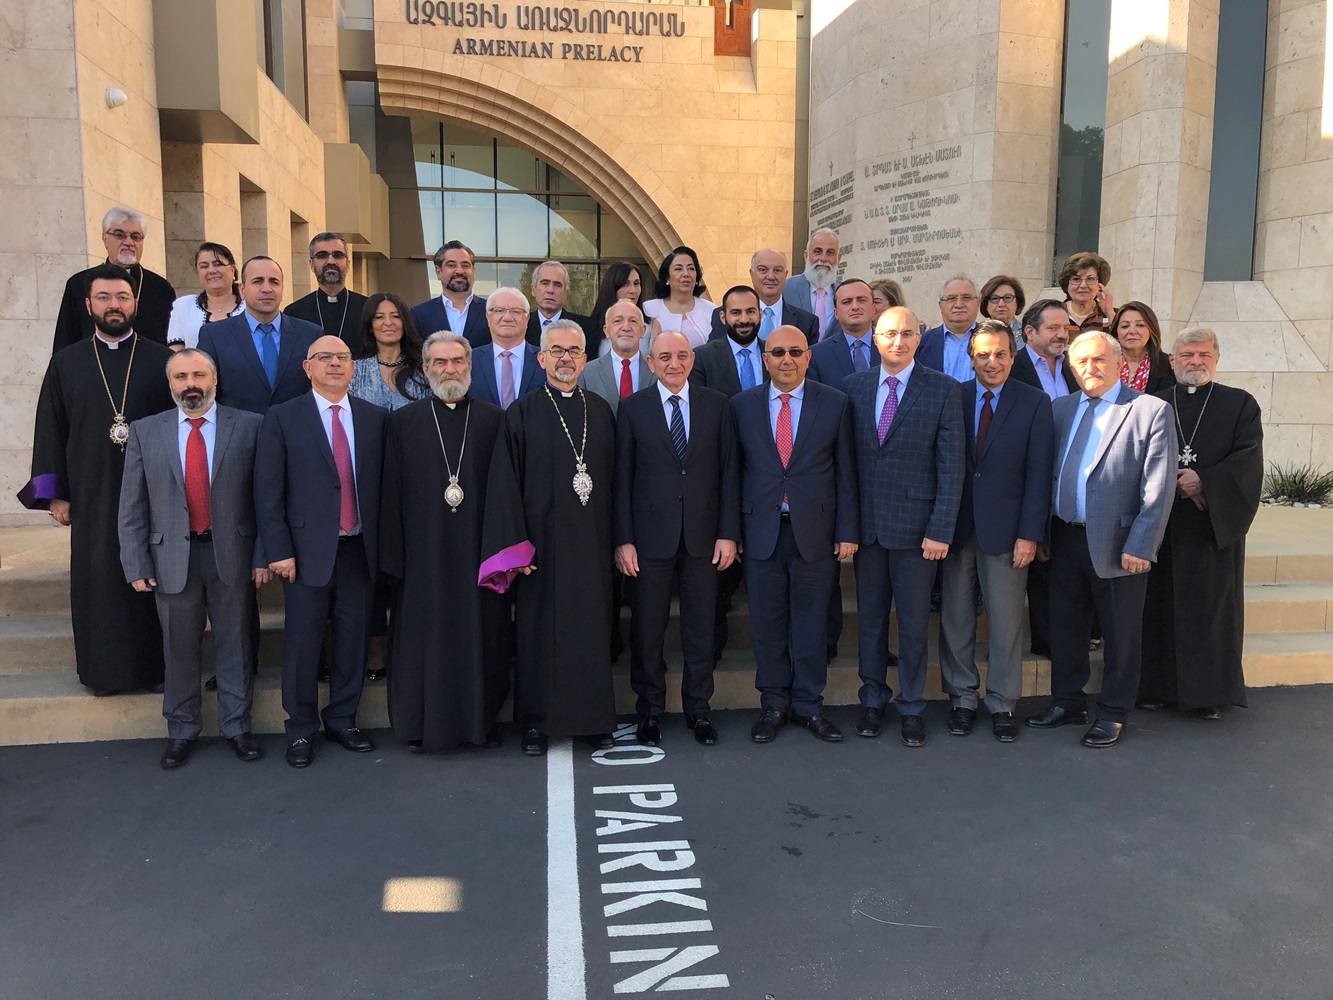 Bako Sahakyan visited Western Prelacy of the Armenian Apostolic Church of North America of the Holy See of the Great House of Cilicia